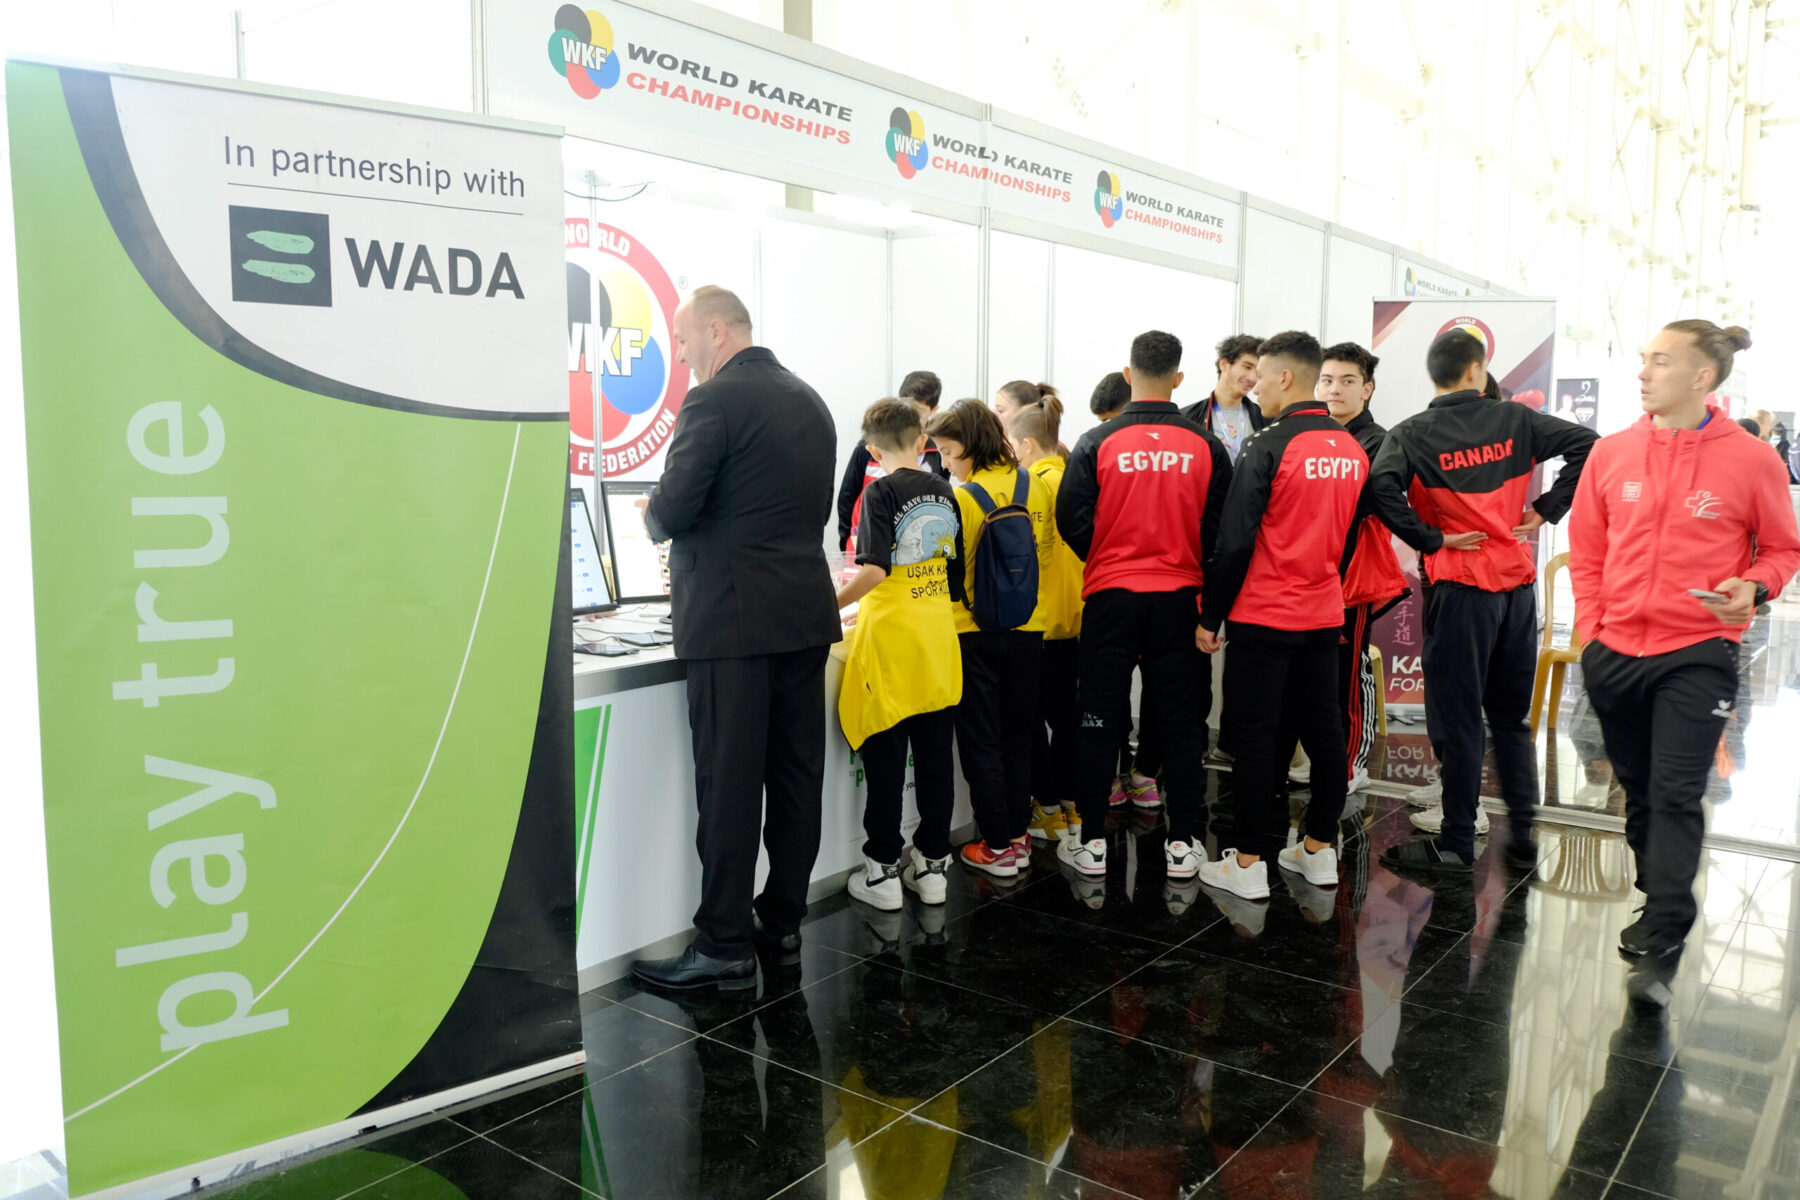 CLEAN SPORT STAND ORGANIZED AT THE WORLD KARATE CHAMPIONSHIP